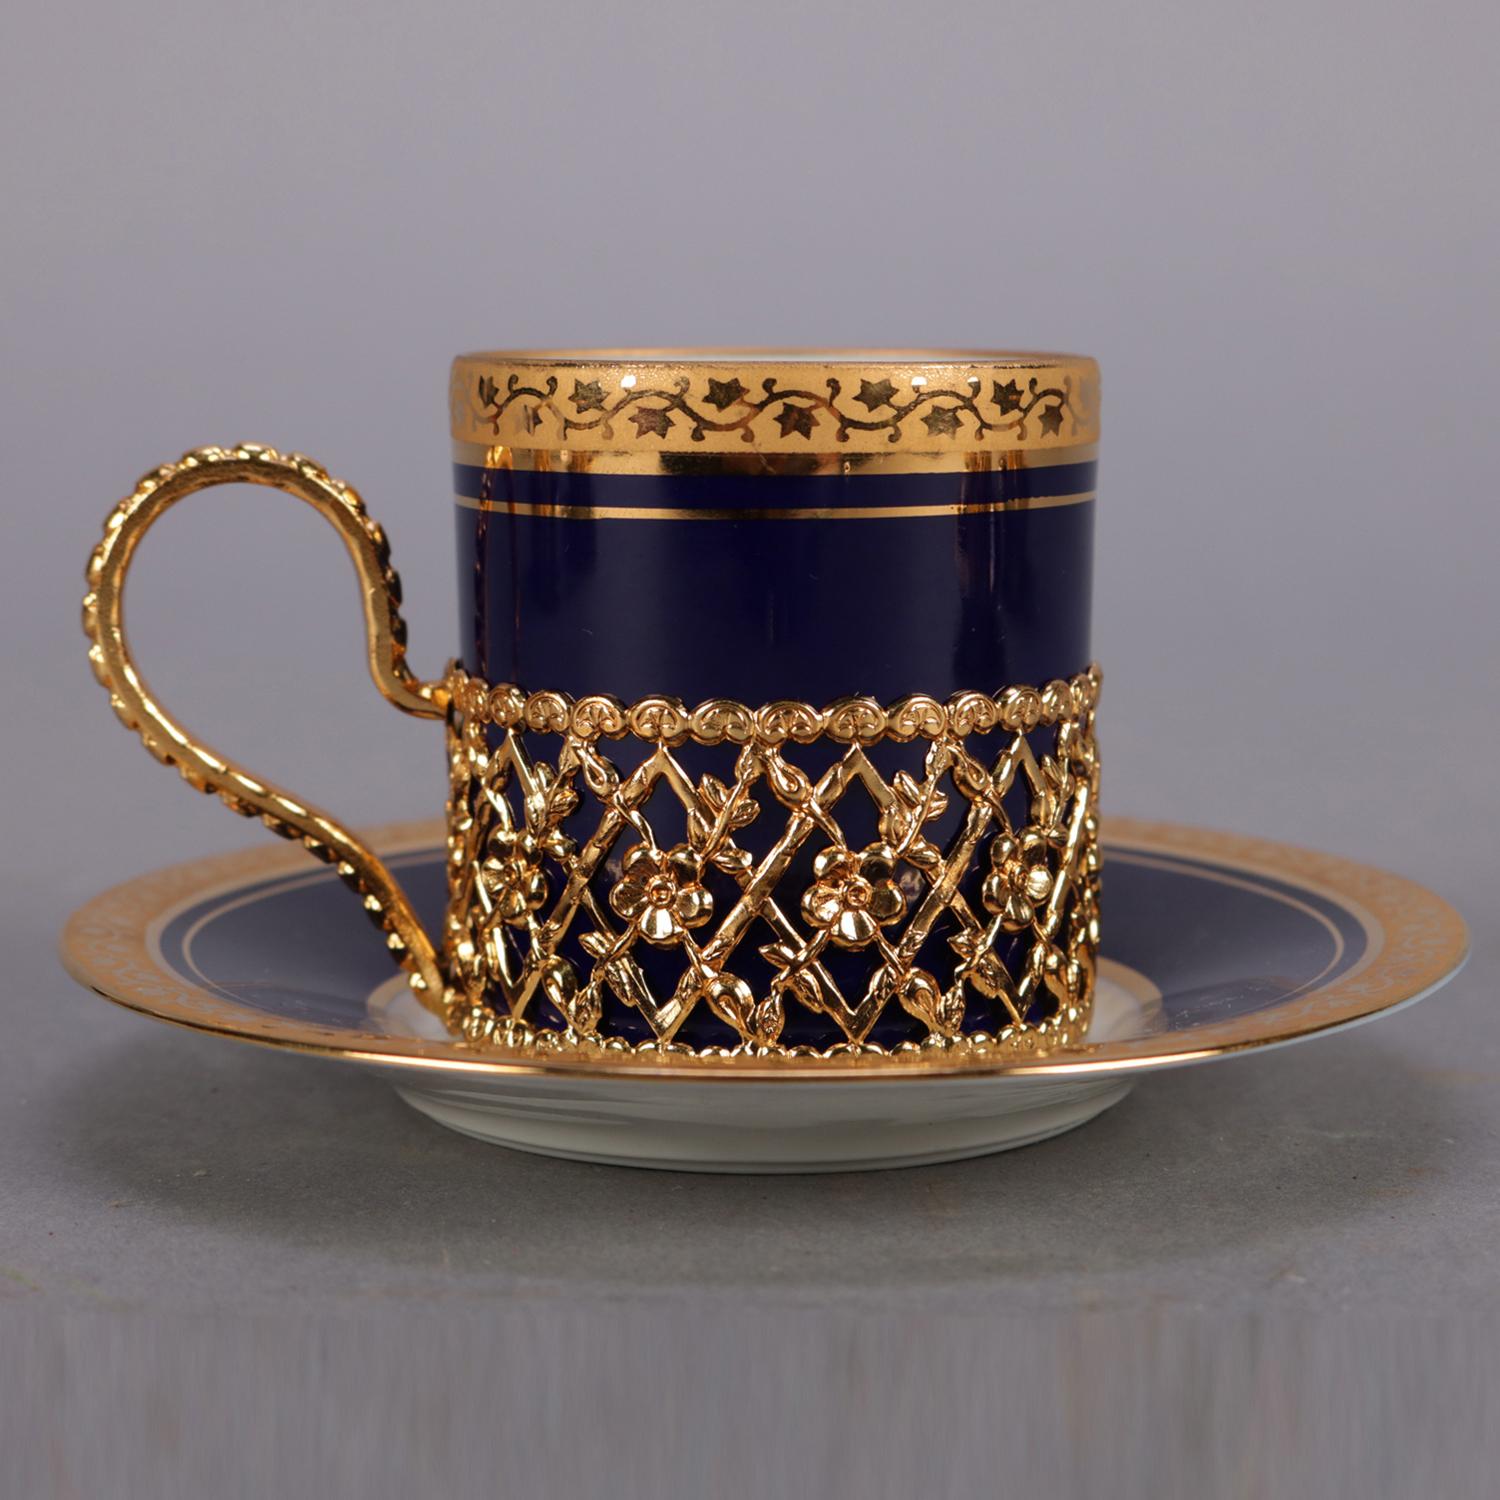 Set of 6 French Limoges porcelain demitasse cups with saucers feature cobalt blue glazing with gilt banding having foliate decoration, cups seated in pierced gilt metal floral and foliate handled baskets, en erso crown and shield Limoges stamp,